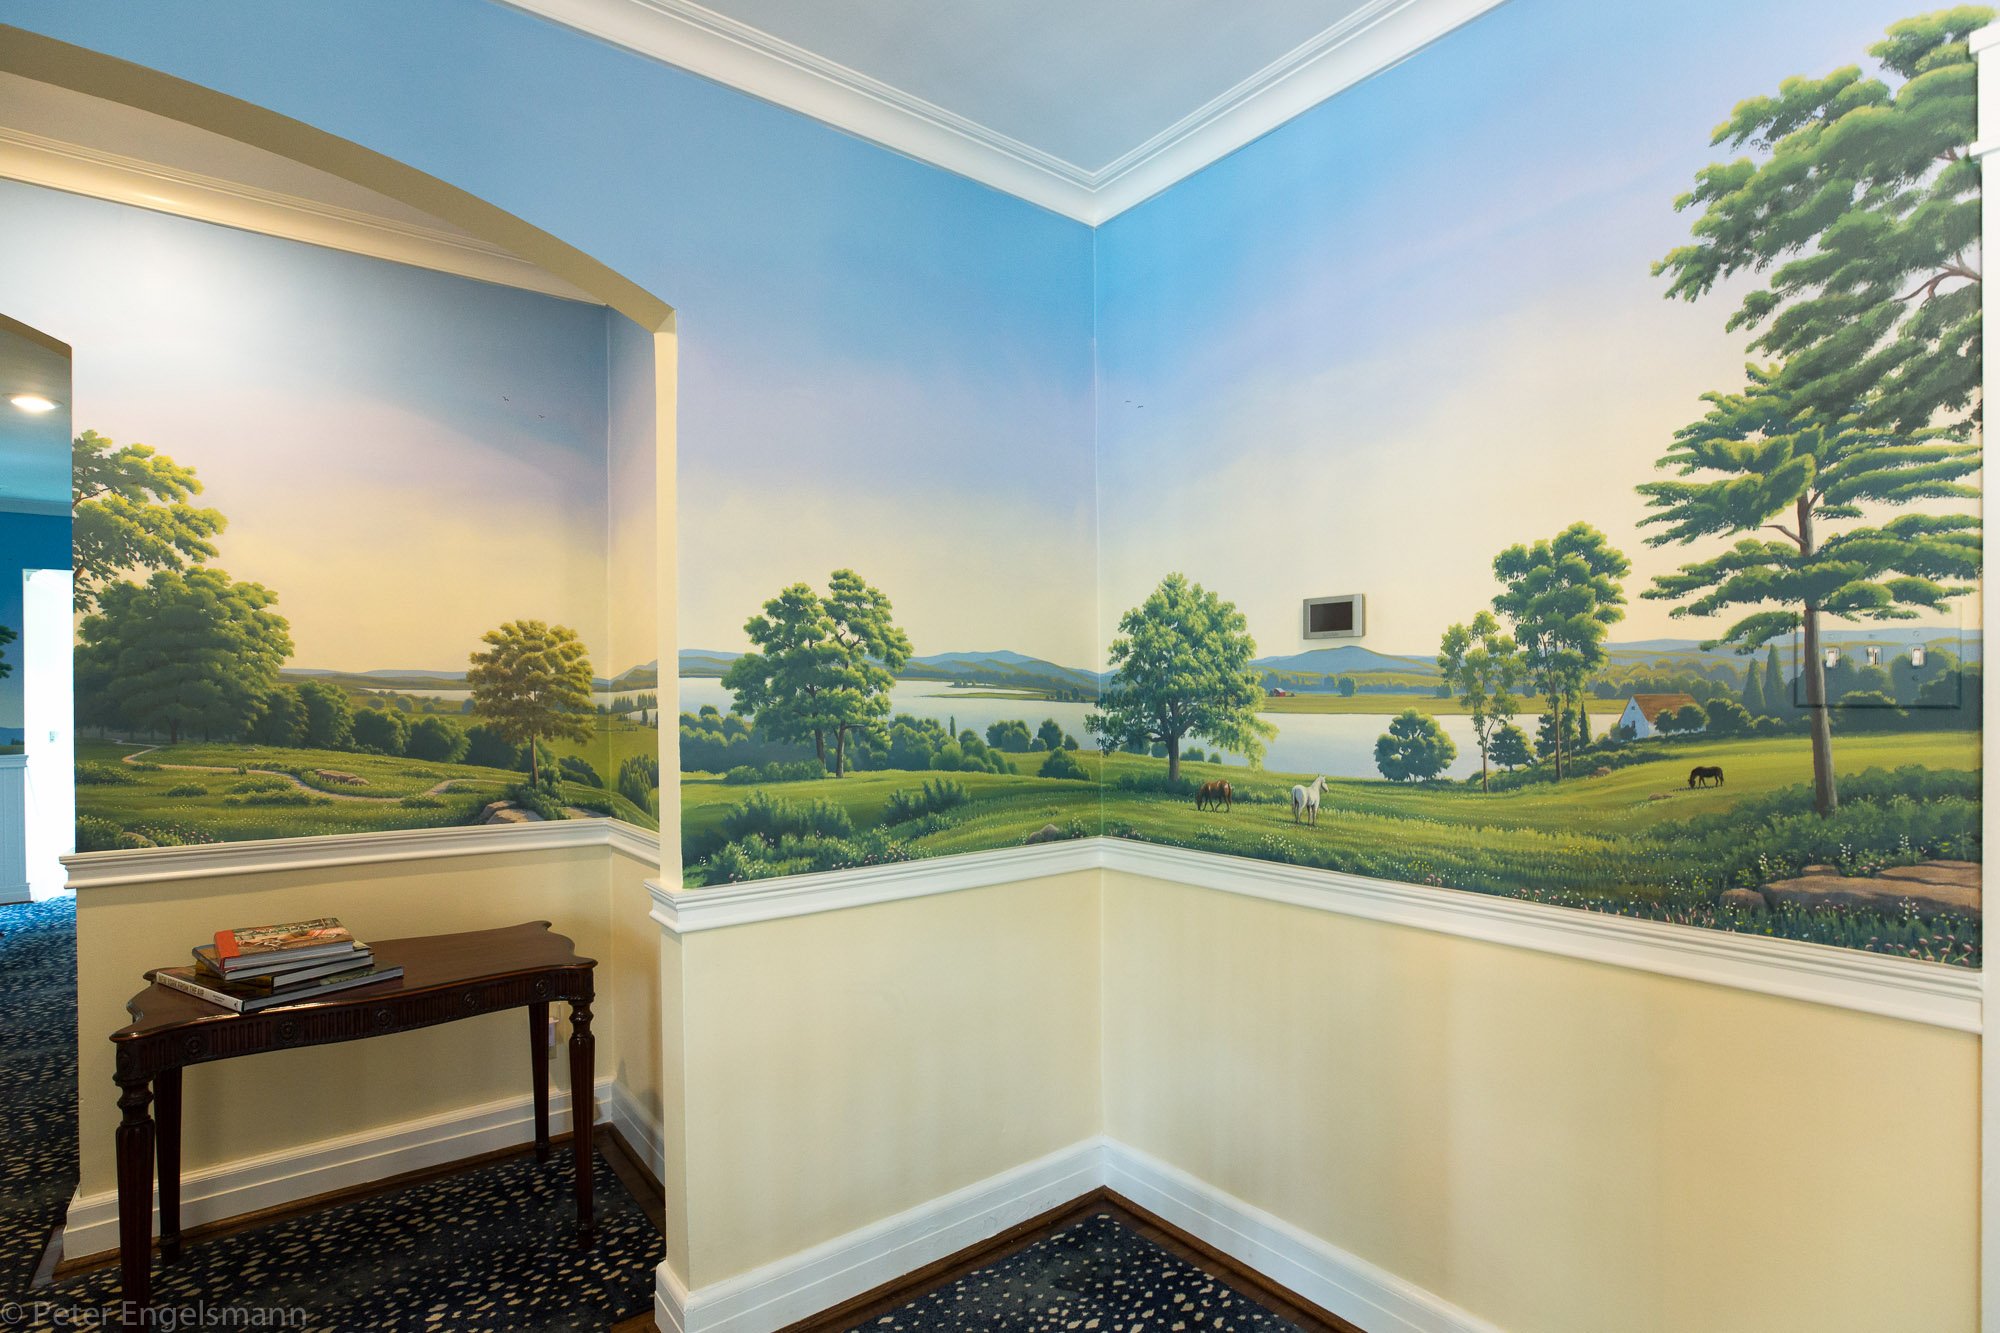  Scenic Hallway Landscape Mural (detail), acrylic on wallboard, private residence. © Peter K. Engelsmann 